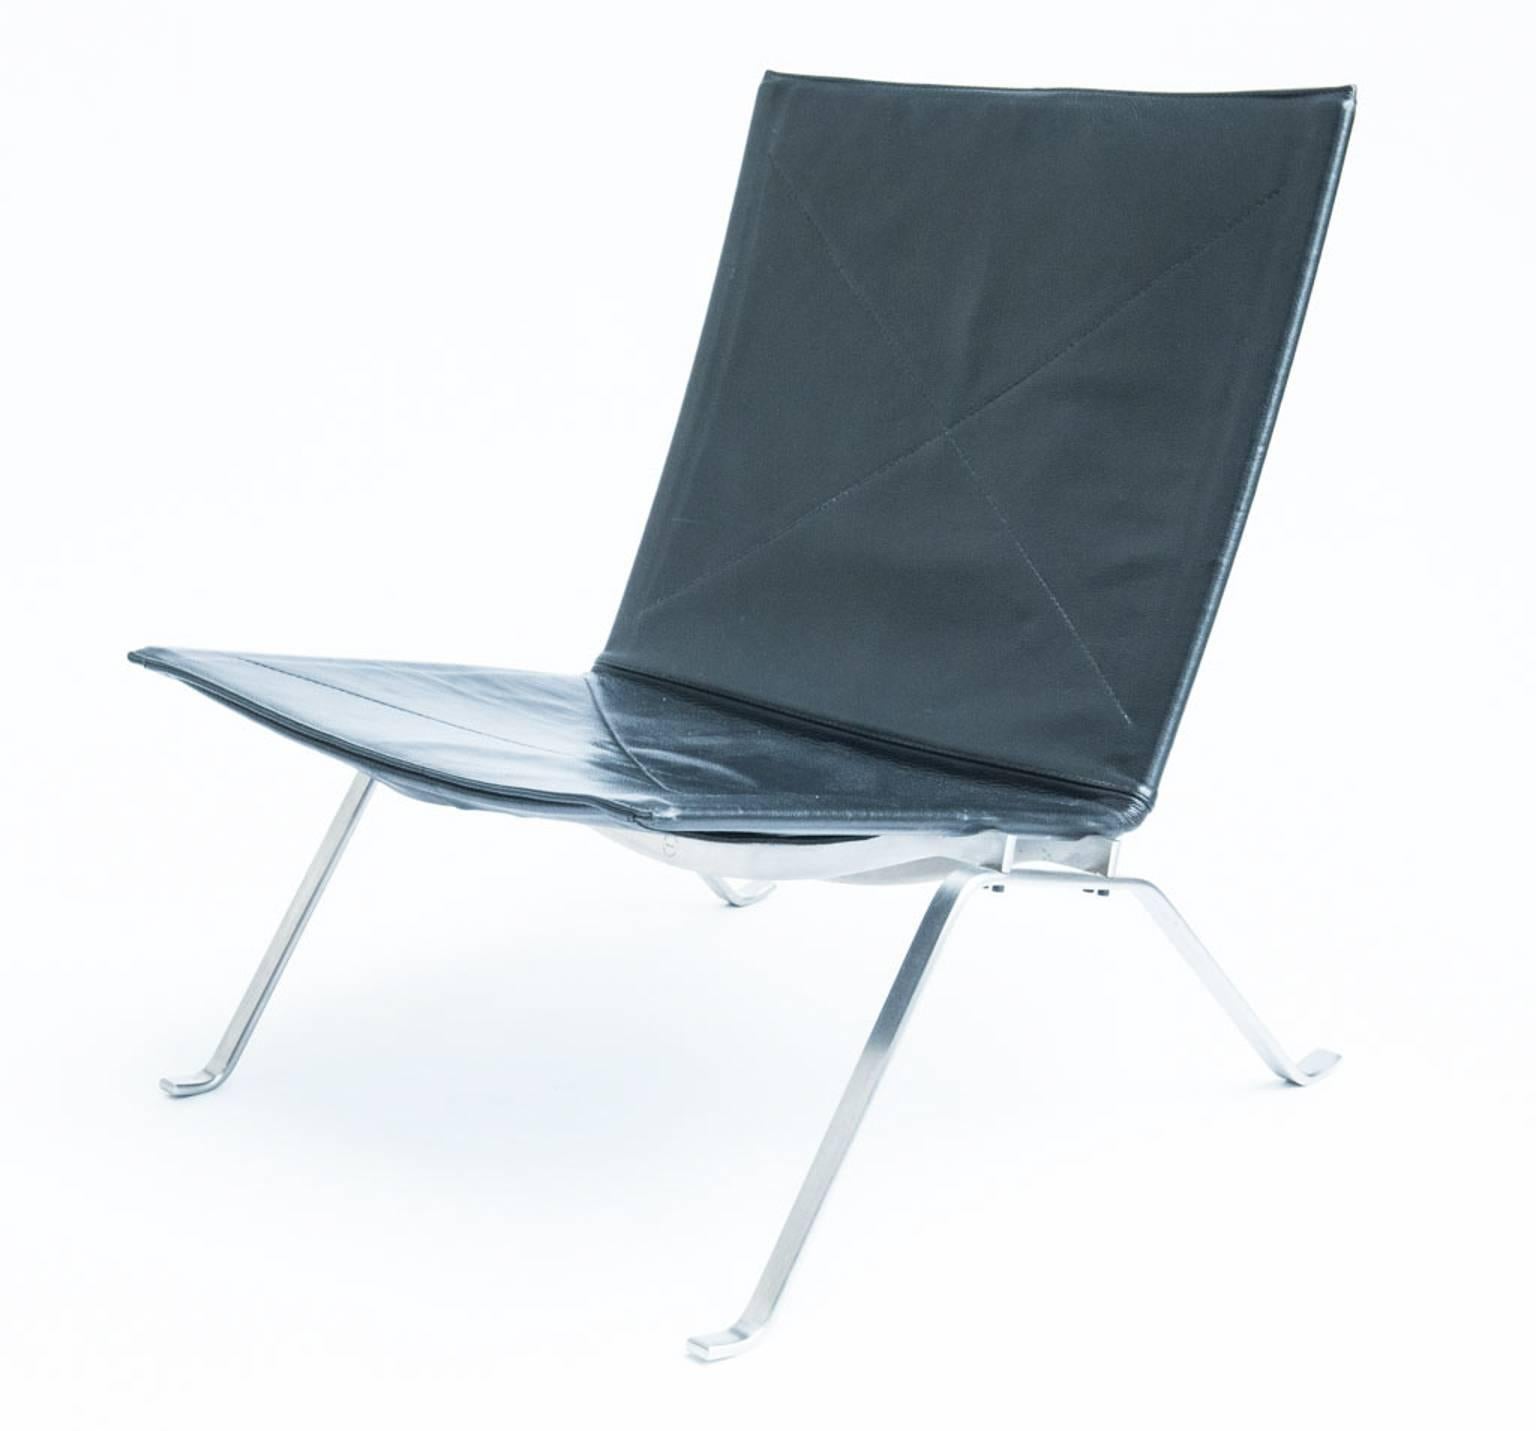 The iconic model PK-22 was designed in 1955, and is probably Kjærholms most famous design. 

Produced and stamped by Fritz Hansen. Literature: Noritsugu Oda. 'Danish chairs', p. 181.